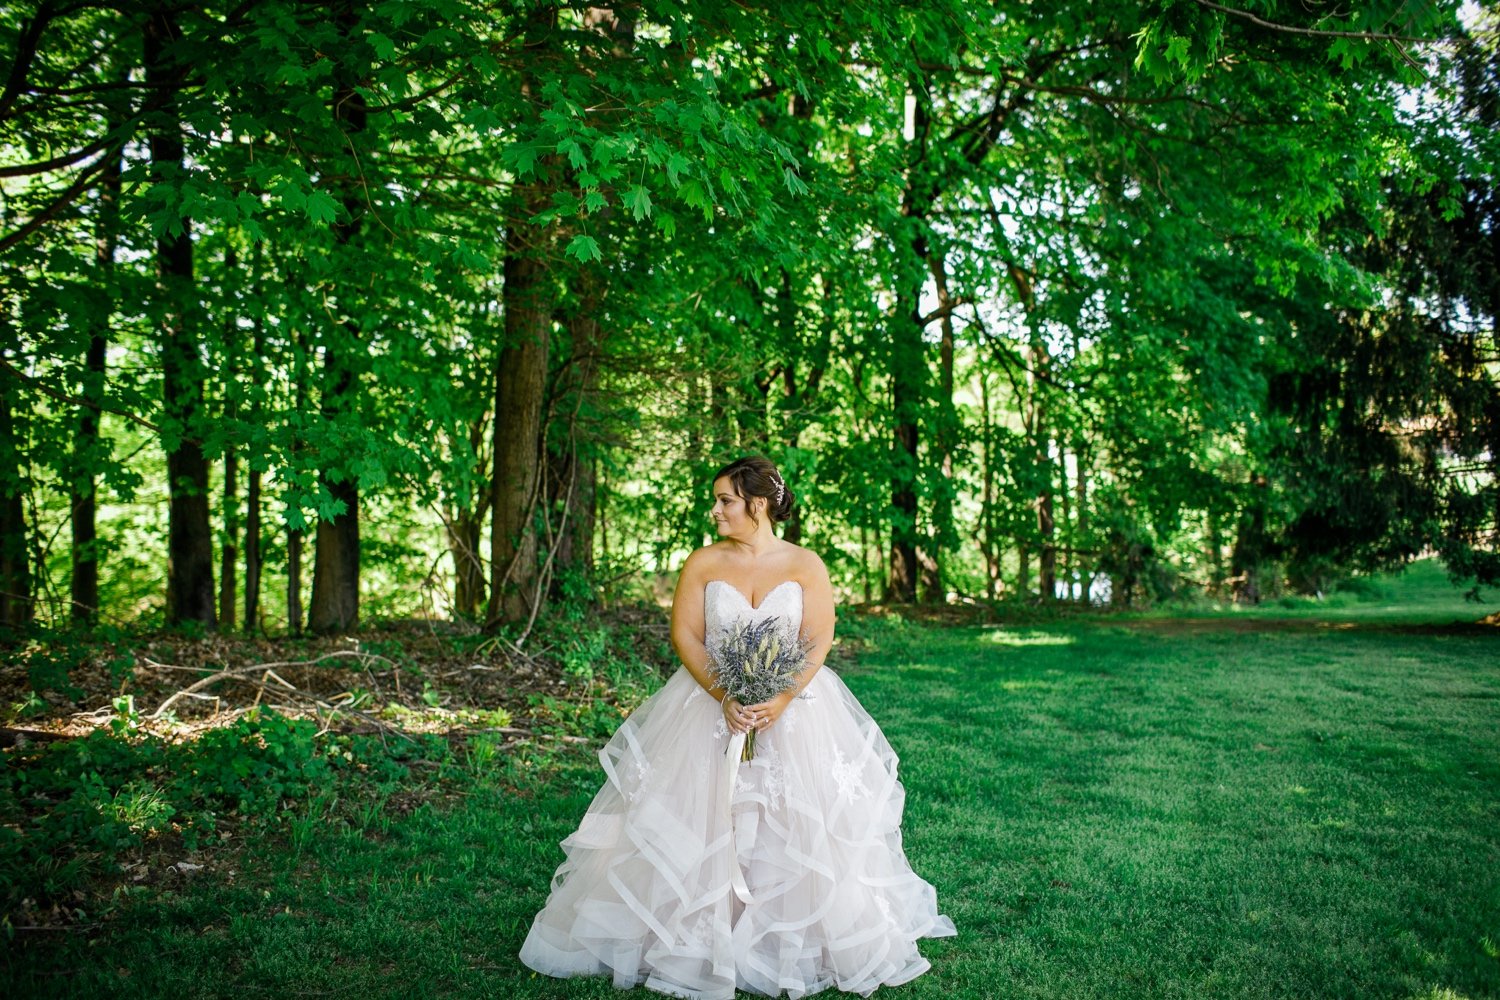 16_Bridal portraits at Otterkill Golf and Country Club by Sweet Alice Photography.jpg